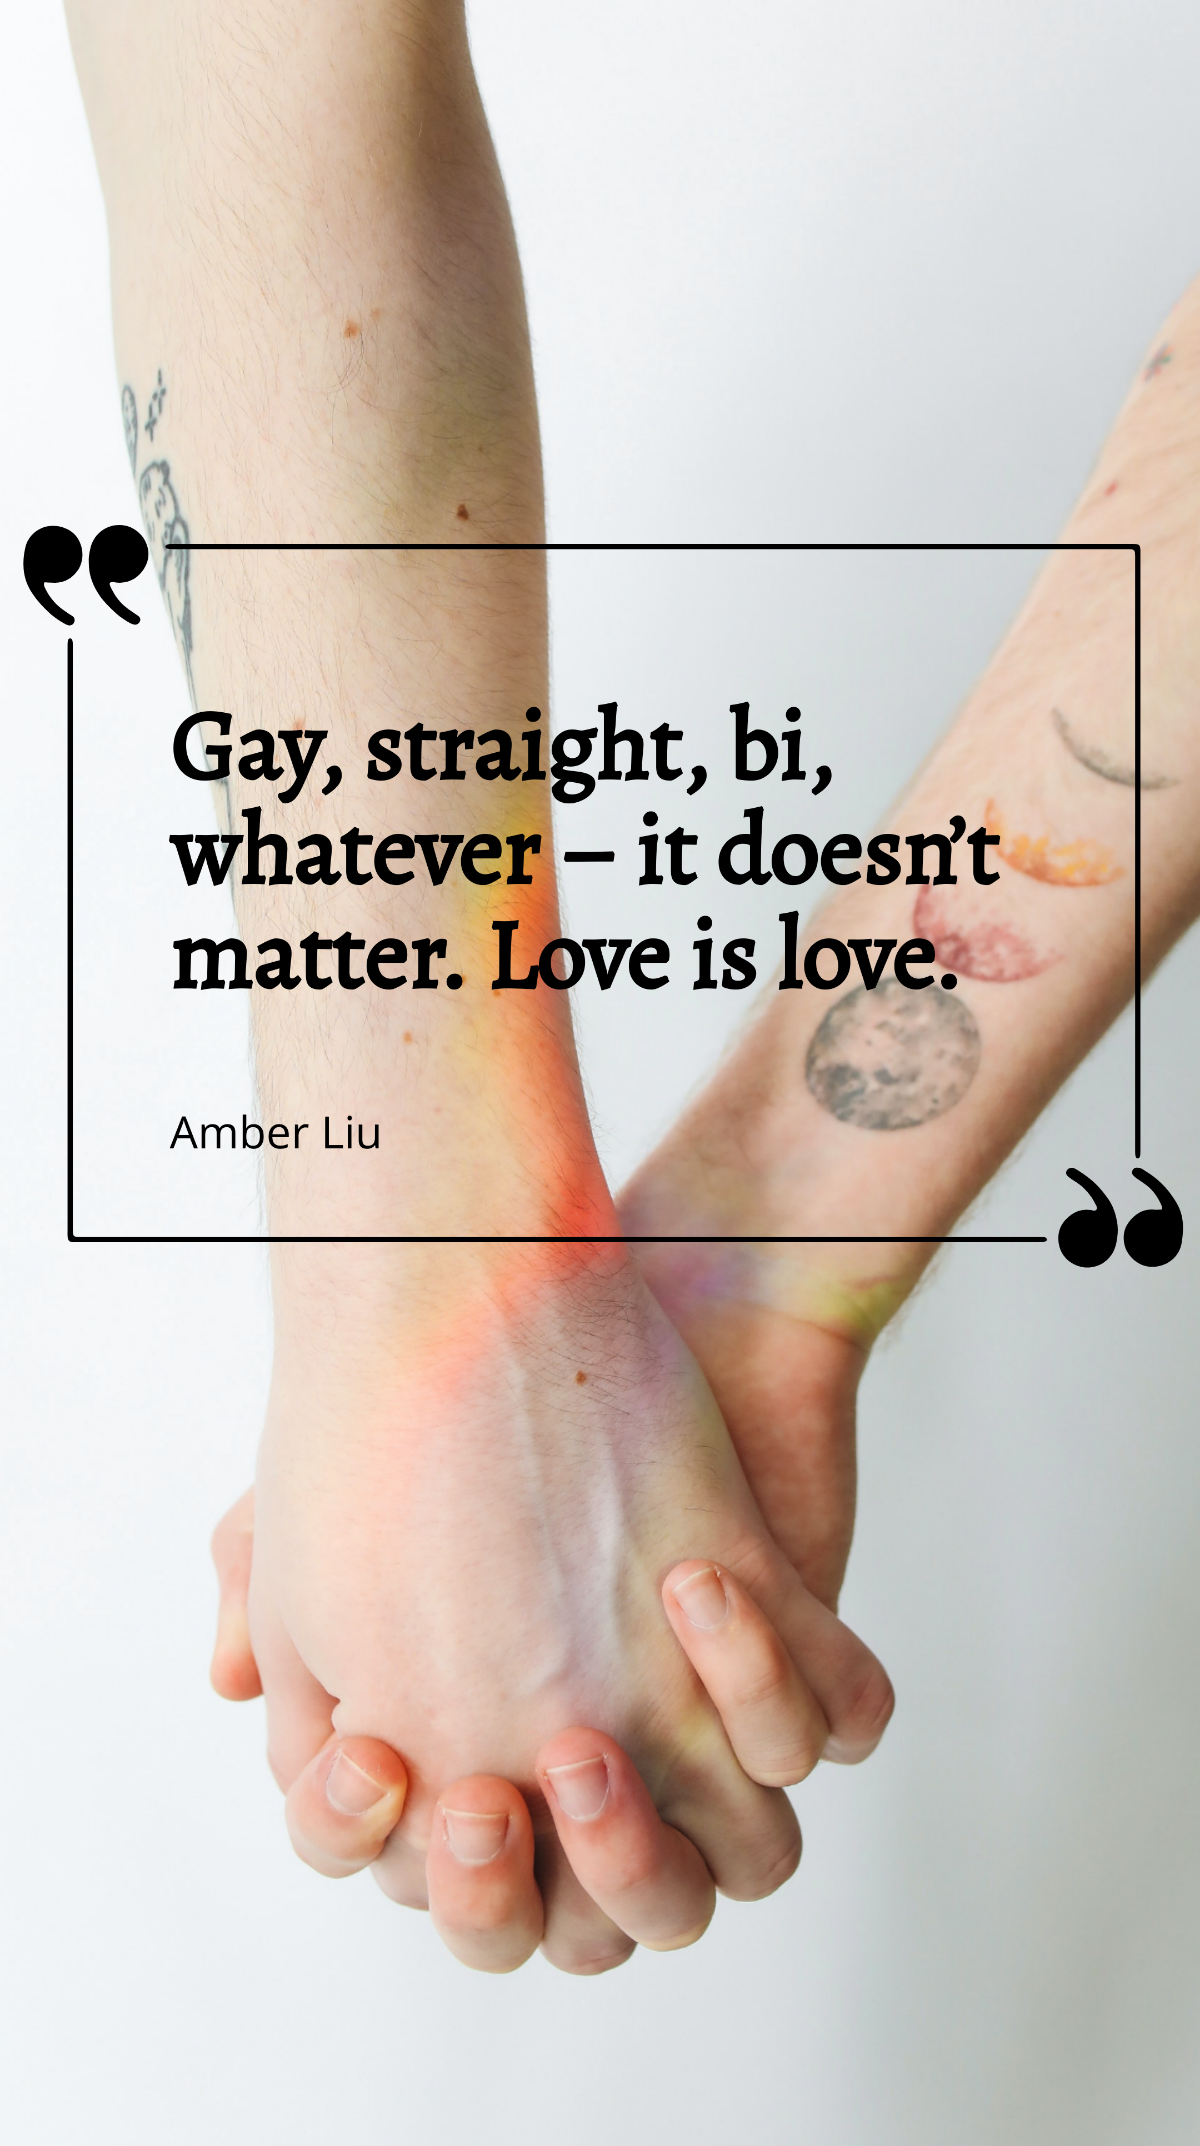 Amber Liu - Gay, straight, bi, whatever – it doesn’t matter. Love is love. Template